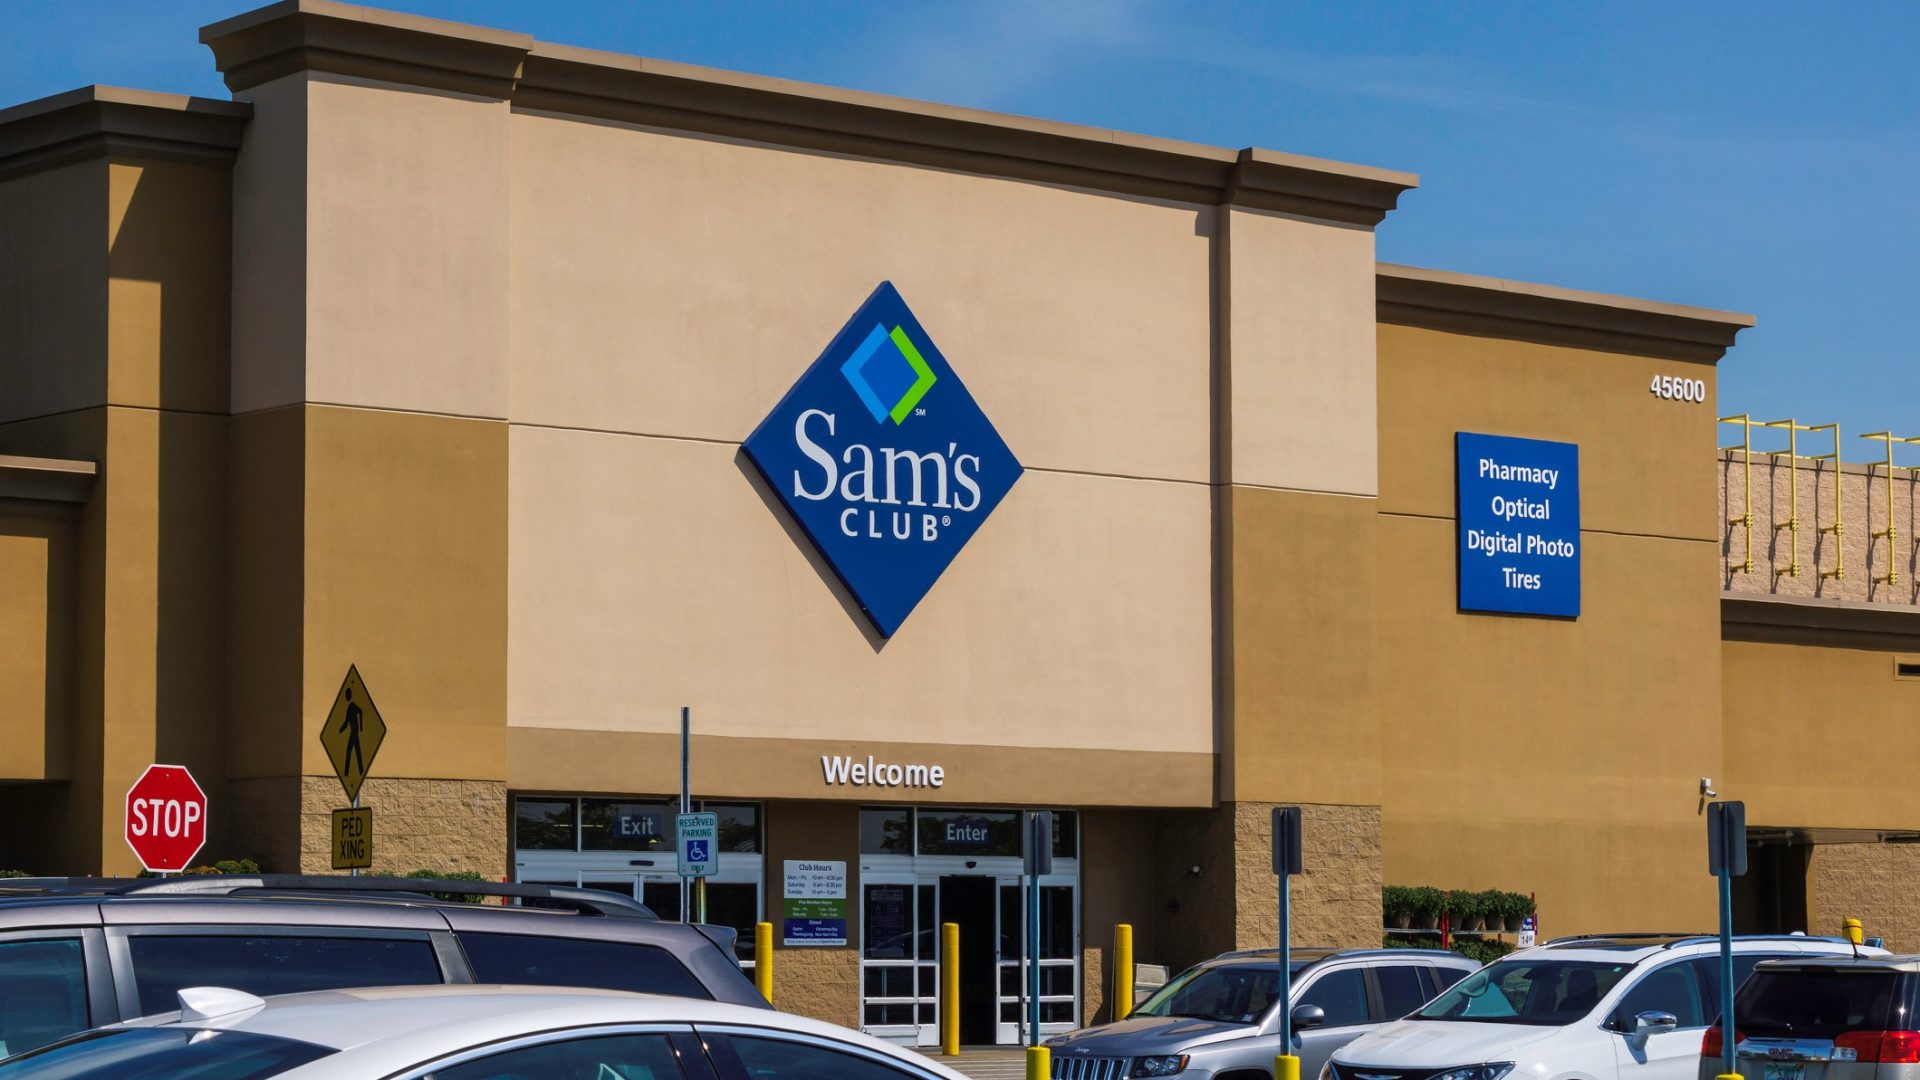 <p>As seasons change, so do your priorities and needs -- and Sam's Club has the deals that can help you <a href="https://www.gobankingrates.com/category/saving-money/budgeting/?utm_campaign=1182159&utm_source=msn.com&utm_content=1&utm_medium=rss">stay within your budget</a> this fall.</p> <p><strong><em>Here It Is: <a href="https://www.gobankingrates.com/2022-small-business-spotlight/?utm_campaign=1182159&utm_source=msn.com&utm_content=2&utm_medium=rss">Our 2022 Small Business Spotlight</a><br>Find: <a href="https://www.gobankingrates.com/this-credit-score-mistake-could-be-costing-millions-of-americans-1350829/?utm_campaign=1182159&utm_source=msn.com&utm_content=3&utm_medium=rss">This Credit Score Mistake Could Be Costing Millions of Americans</a></em></strong></p> <p>No matter if you need to stock up on treats for Halloween, save money on daily breakfasts or get your pumpkin spice fix, Sam's has the products -- and more importantly, the great prices -- you want. </p> <p>Here are nine of the best deals at Sam's Club for fall 2022 that are <a href="https://www.gobankingrates.com/saving-money/shopping/best-deals-at-sams-club-fall-2022/?utm_campaign=1182159&utm_source=msn.com&utm_content=4&utm_medium=rss">worthy of a warehouse trip</a>.</p>